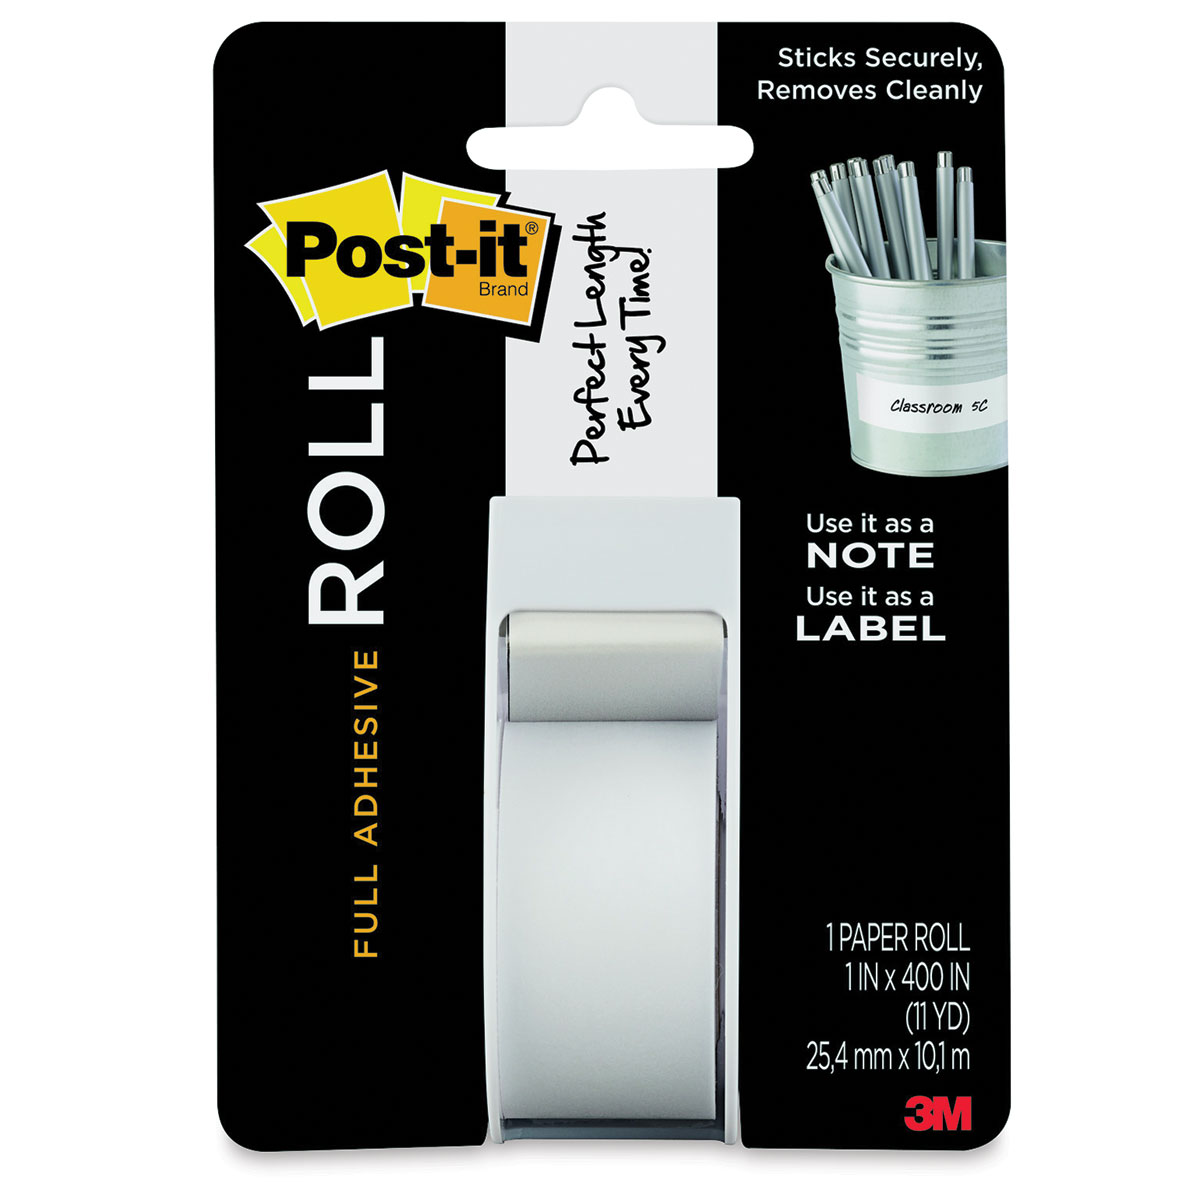 Now roll. Бумага Top Stick Labels. Cleanly. Stick Removable self-Adhesive Notes. Post it Notes super Sticky 2x sticking Powder.